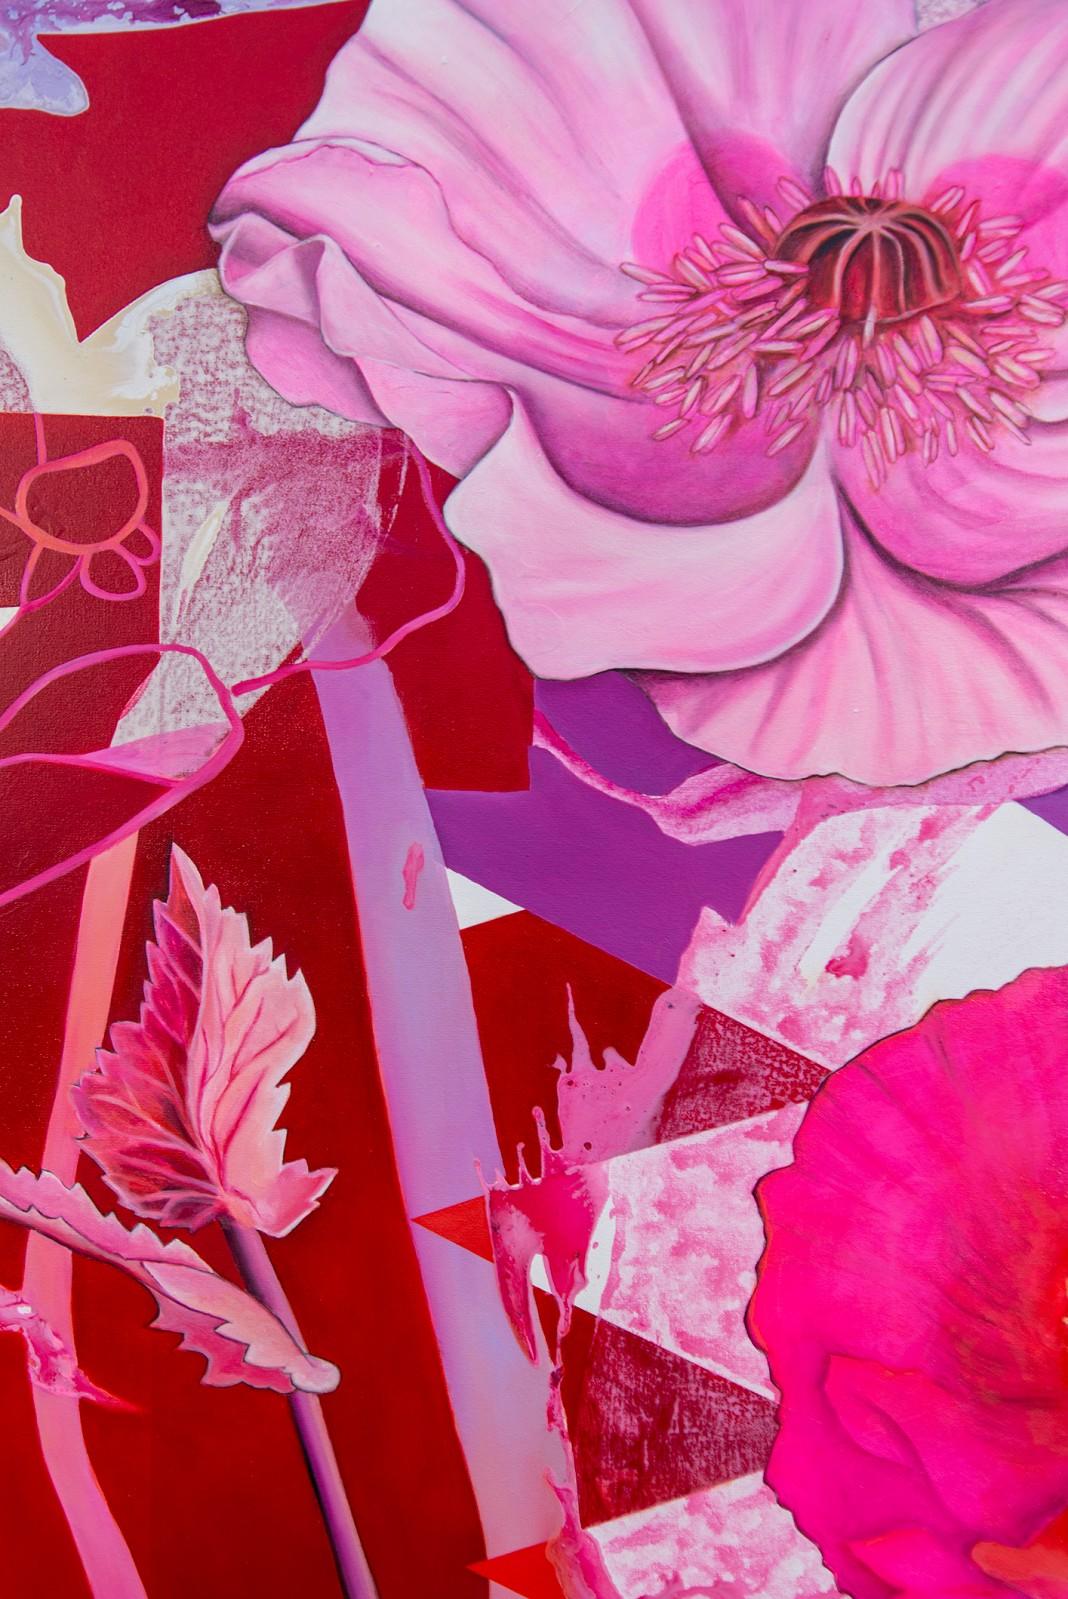 Dream Flower - lively, fuscia, overlapping botanicals, acrylic, oil on canvas - Contemporary Painting by Fiona Ackerman